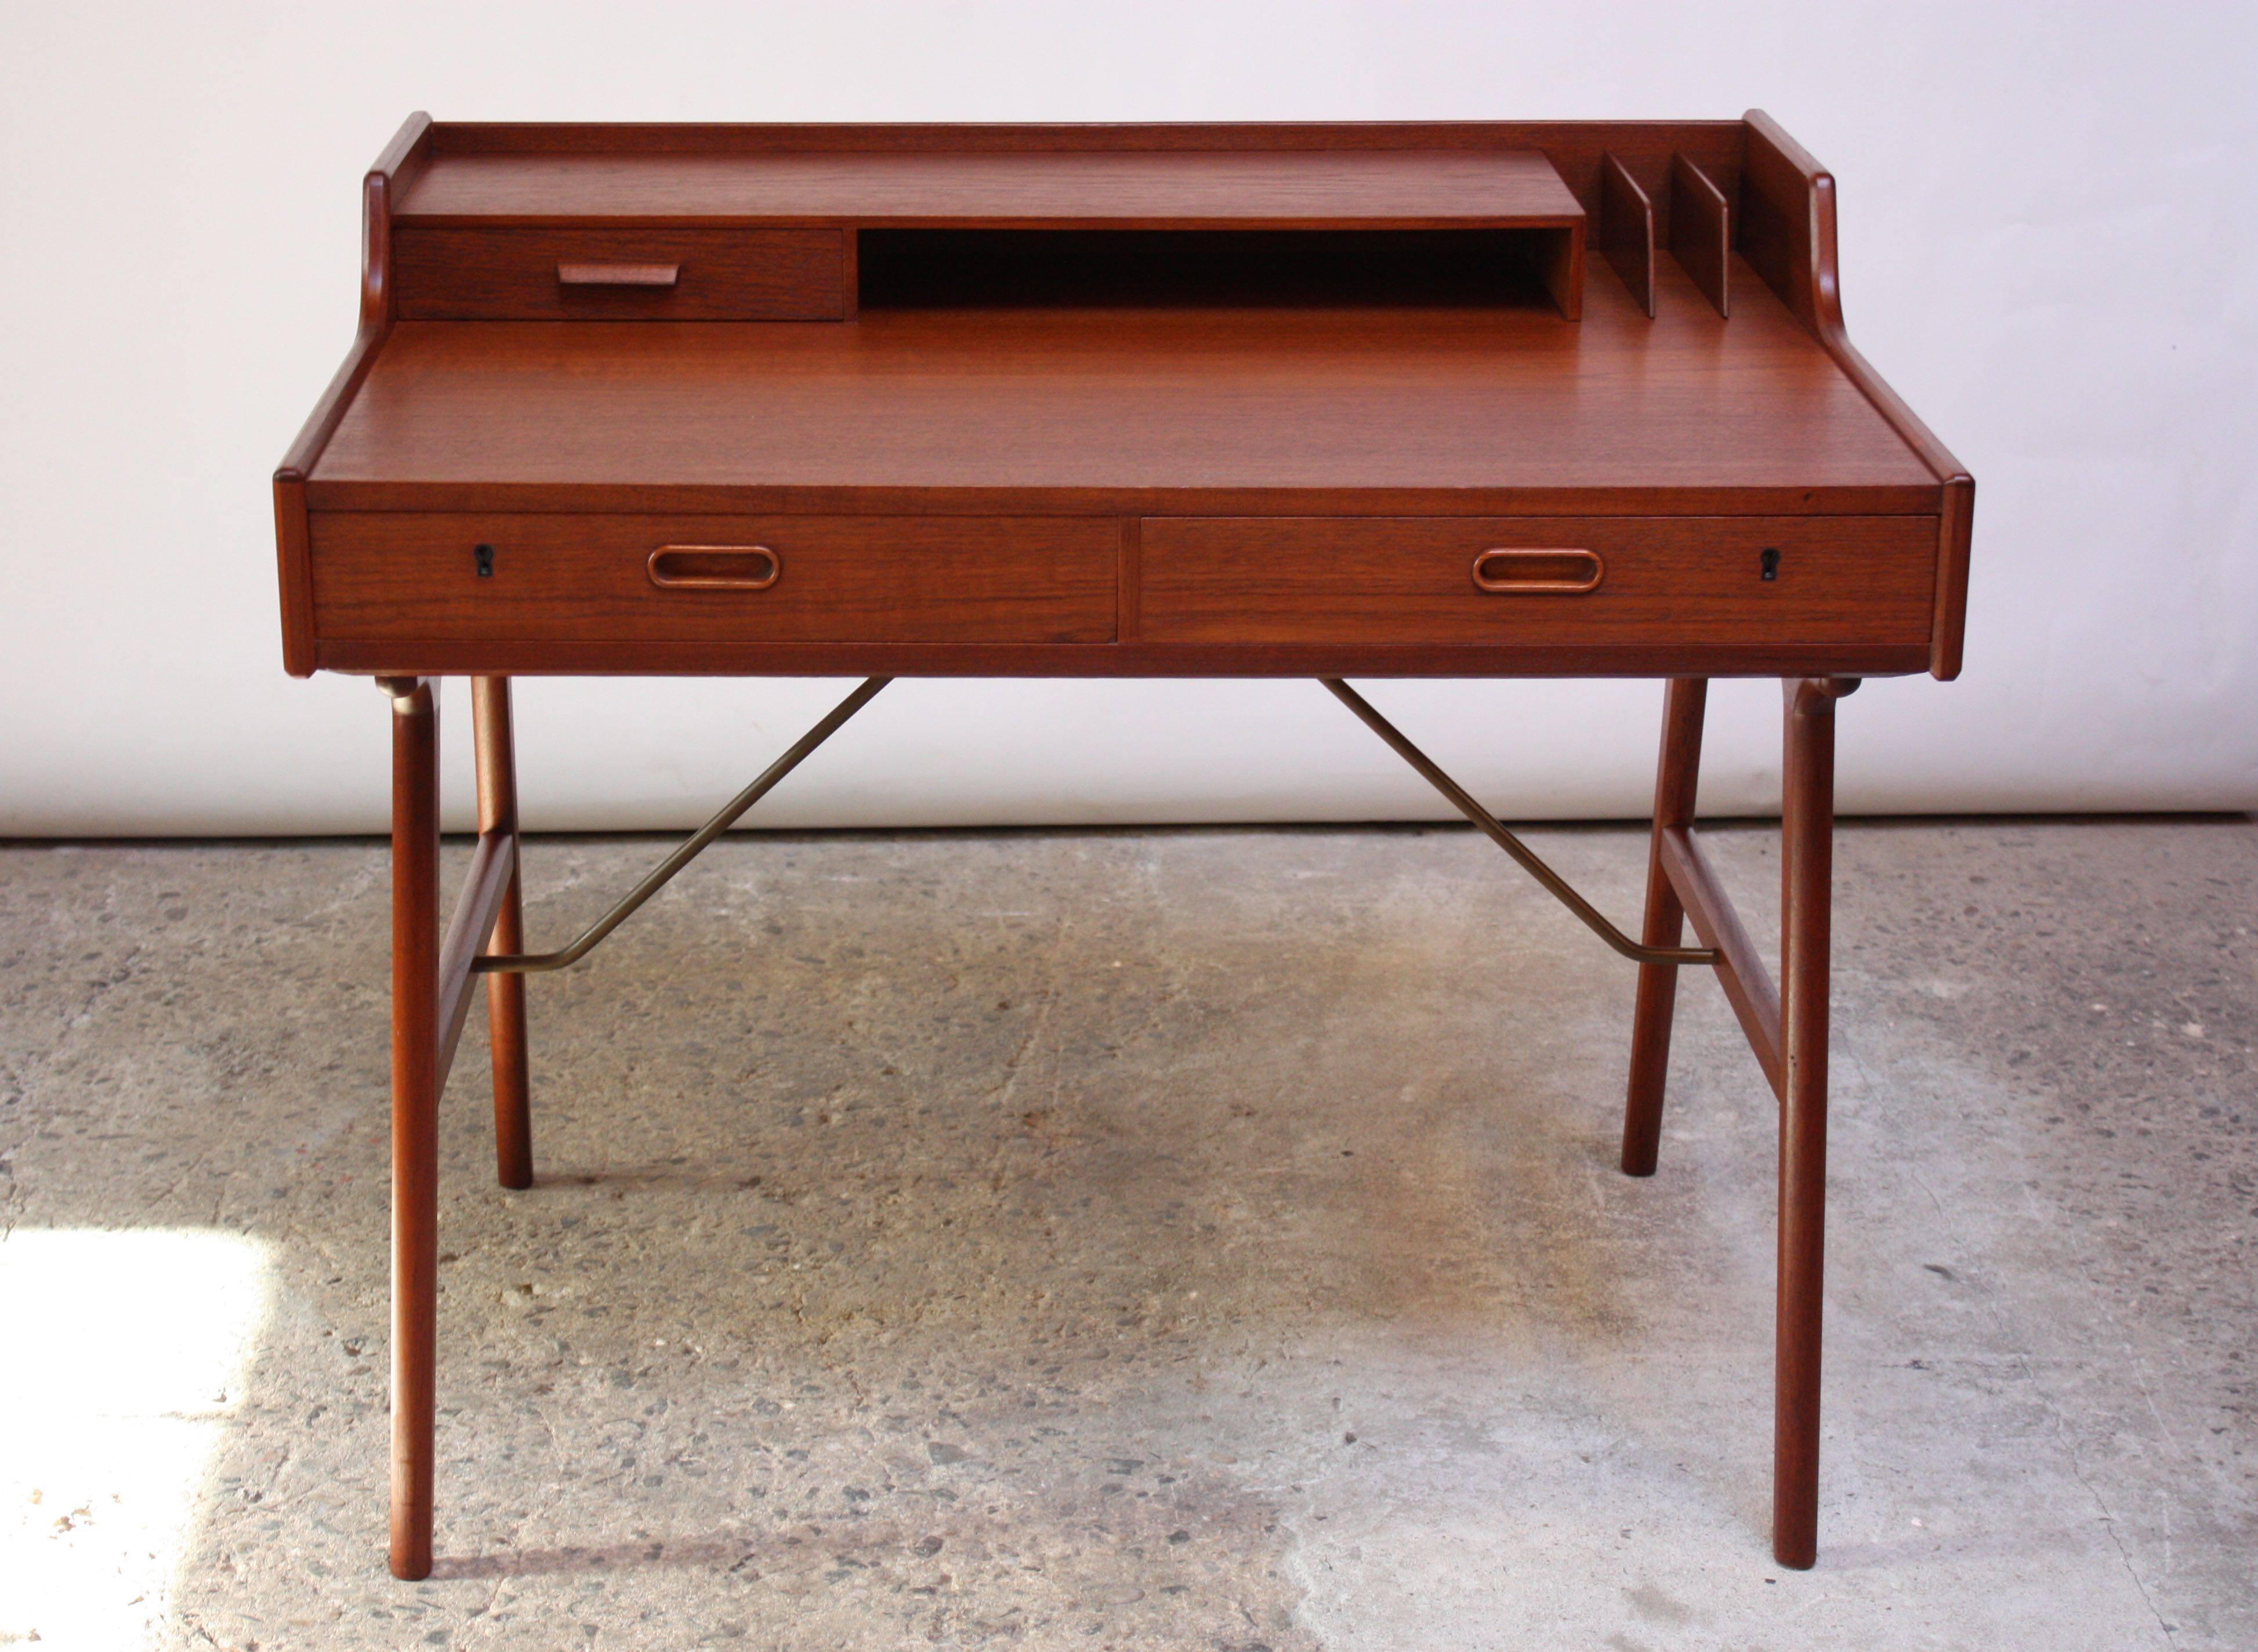 This sculptural desk (model #56) was designed by Arne Wahl Iversen for Vinde Mobelfabrik in 1961. Referred to as the 'Ladies Desk,' given its diminutive size and dual use as a vanity. Features two drawers, each with its own lock, and a second tier